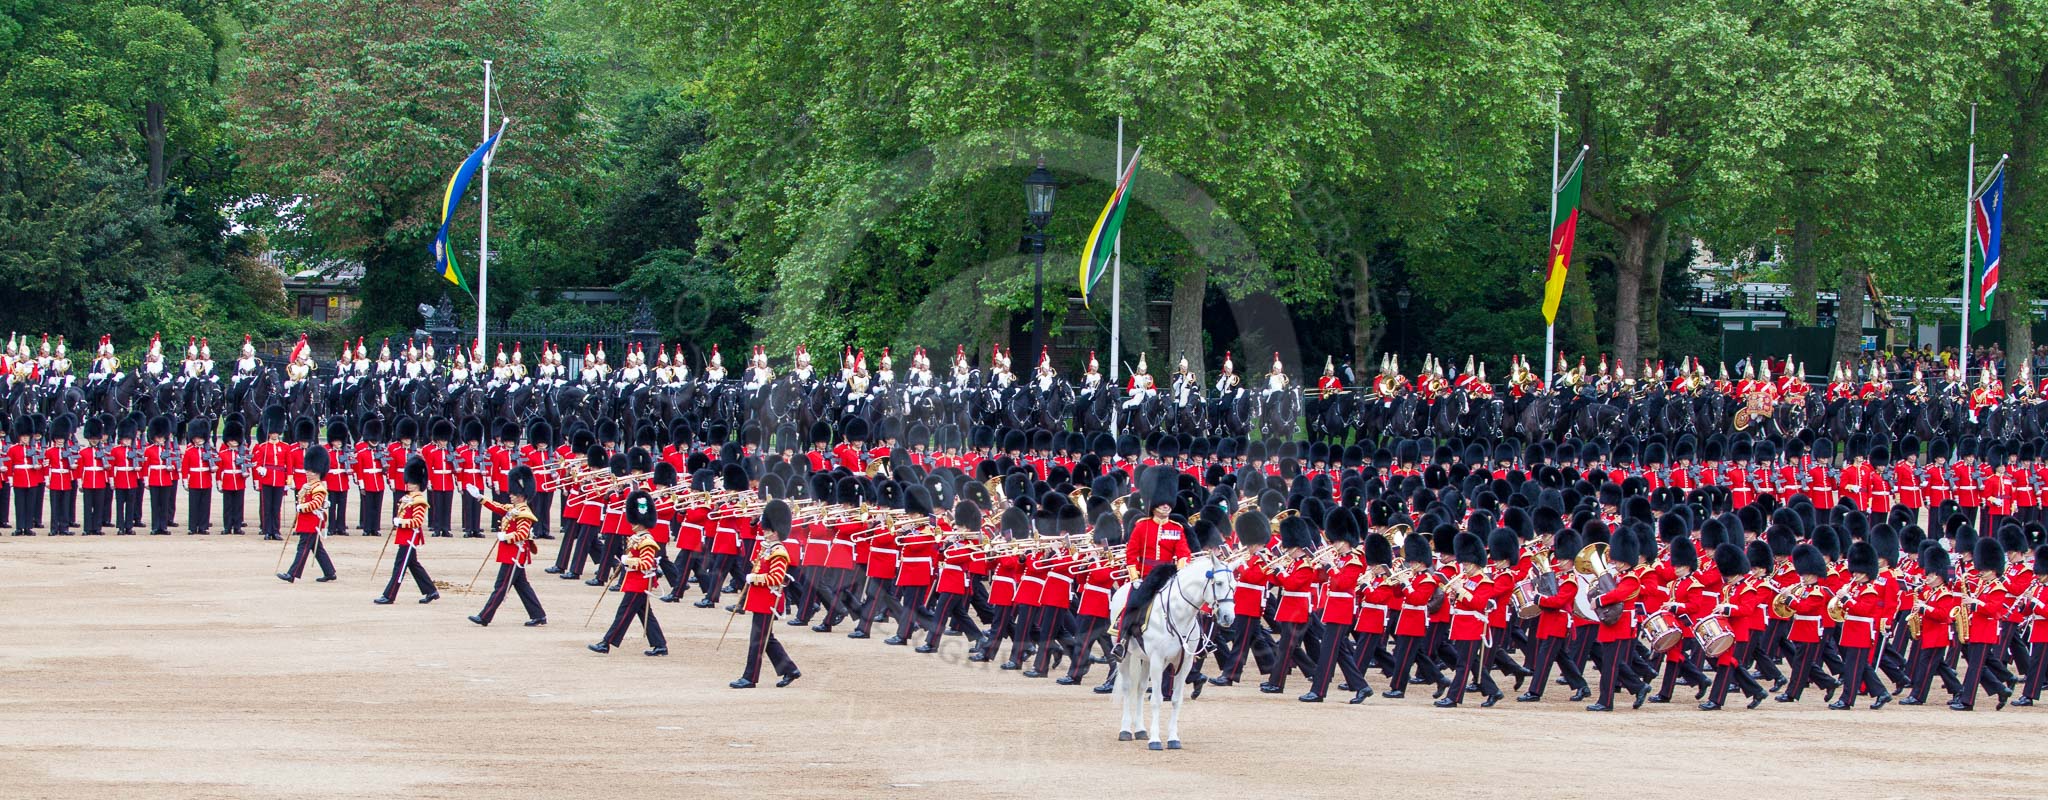 Major General's Review 2013: The Field Officer and the five Drum Majors after the Escort for the Colour has become the Escort to the Colour and the Massed Bands are performing the legendary spin wheel..
Horse Guards Parade, Westminster,
London SW1,

United Kingdom,
on 01 June 2013 at 11:22, image #414